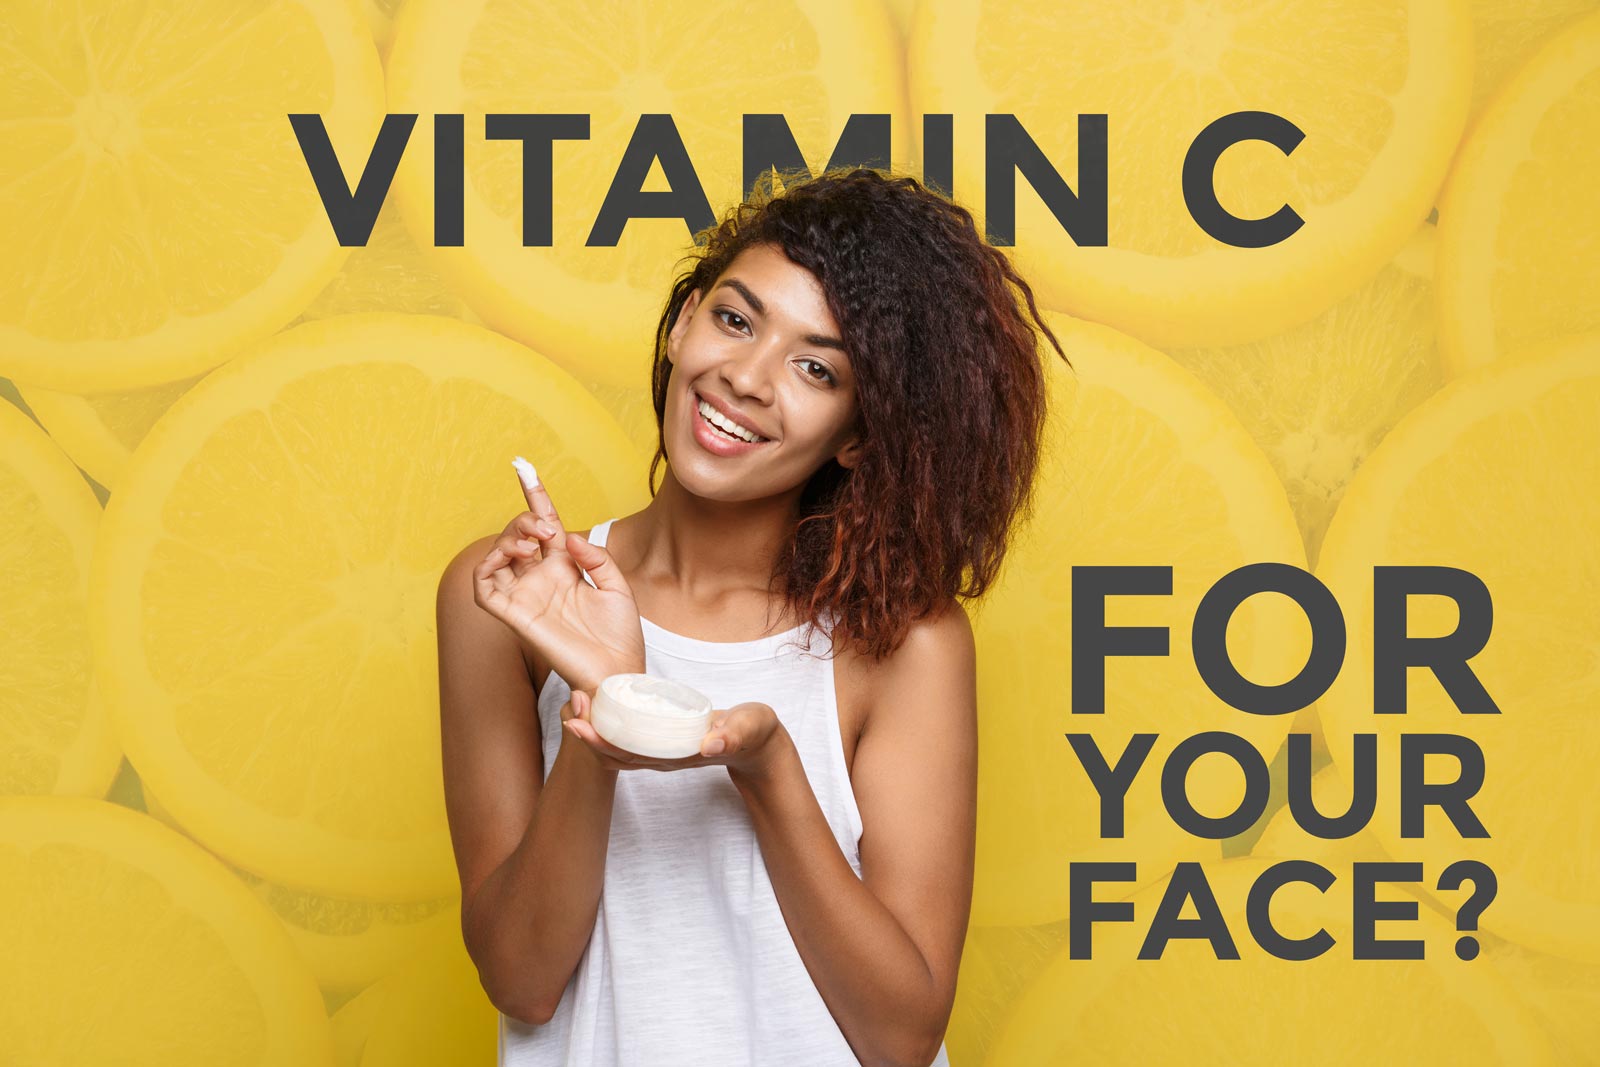 Vitamin C for your face